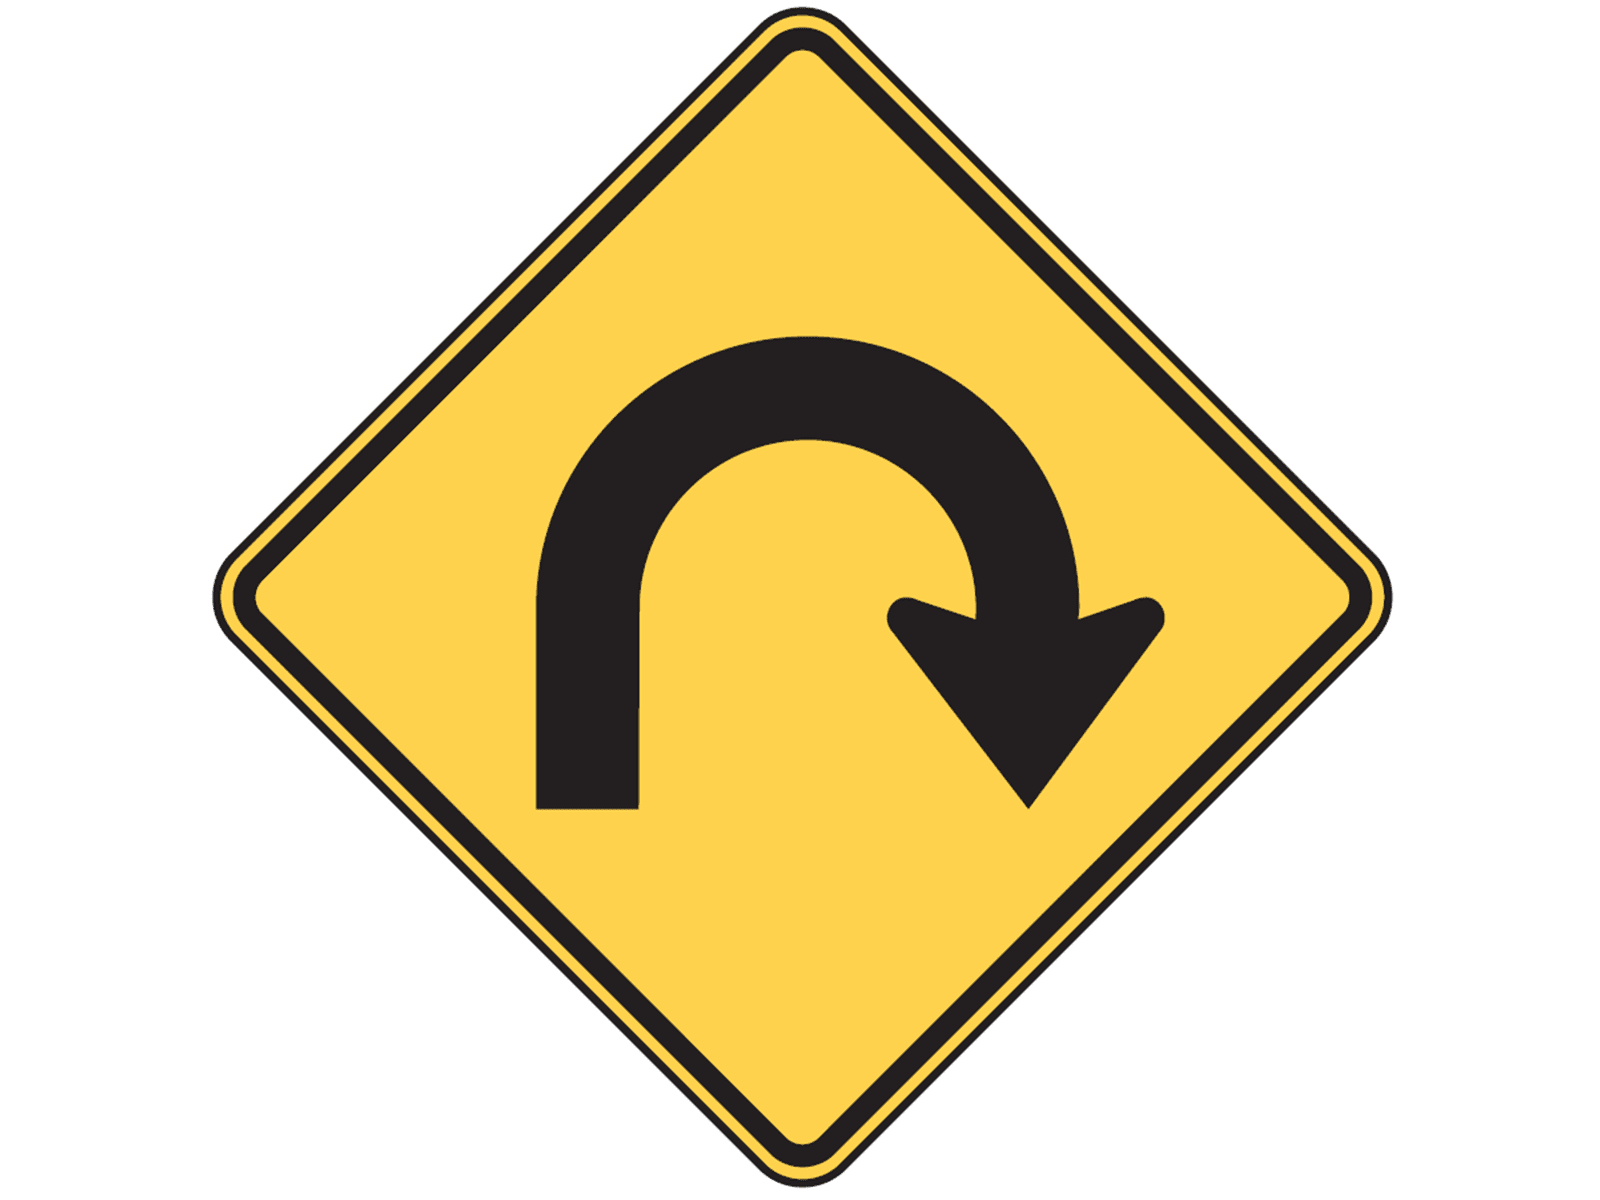 Hairpin Curve W1-11 - W1: Curves and Turns